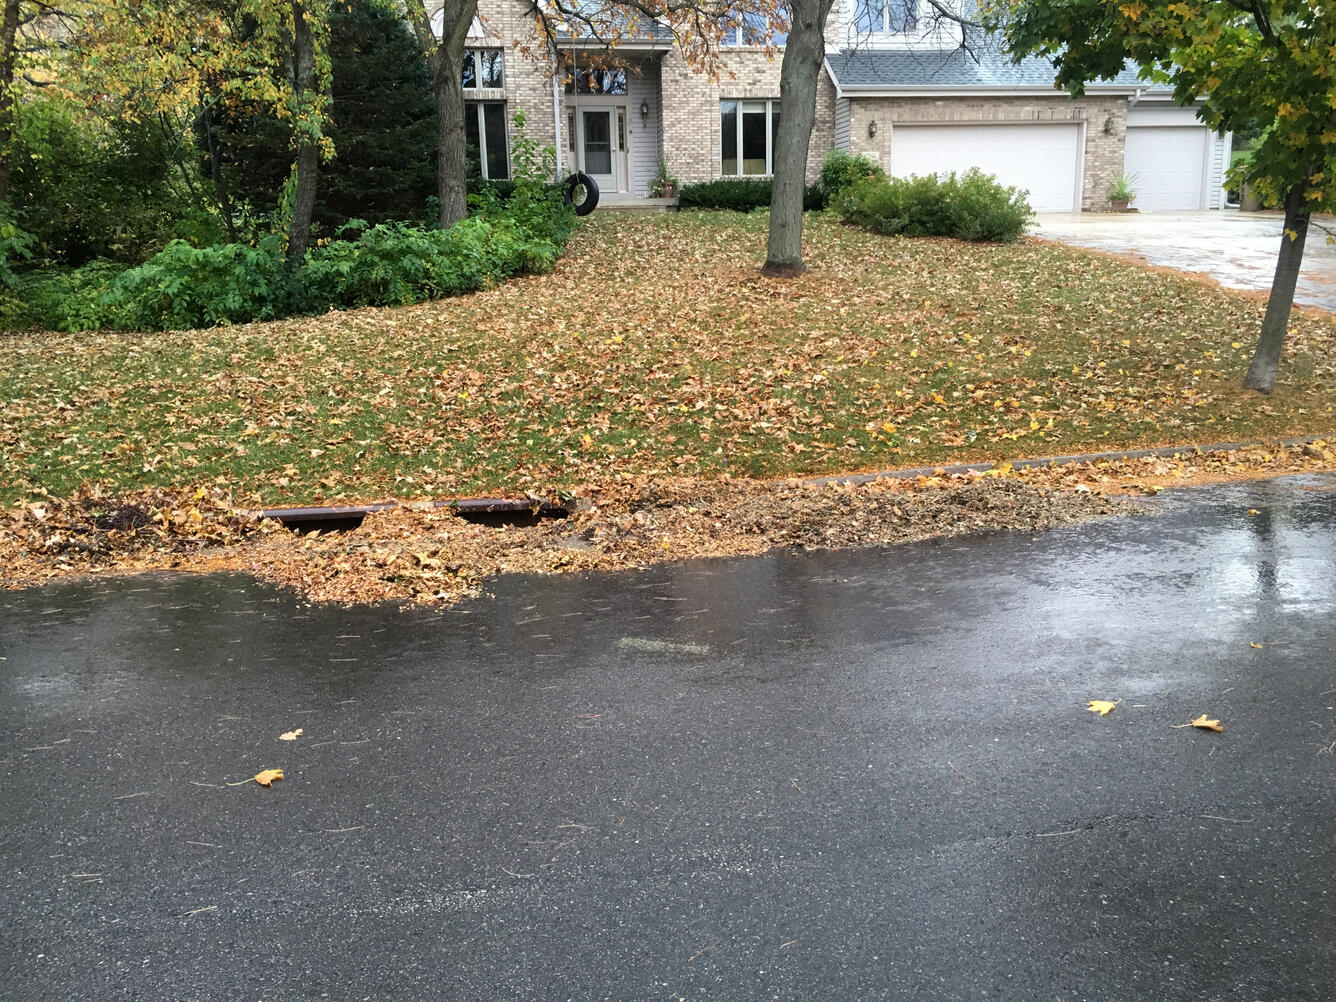 Photo of storm drains clogged by fall leaves